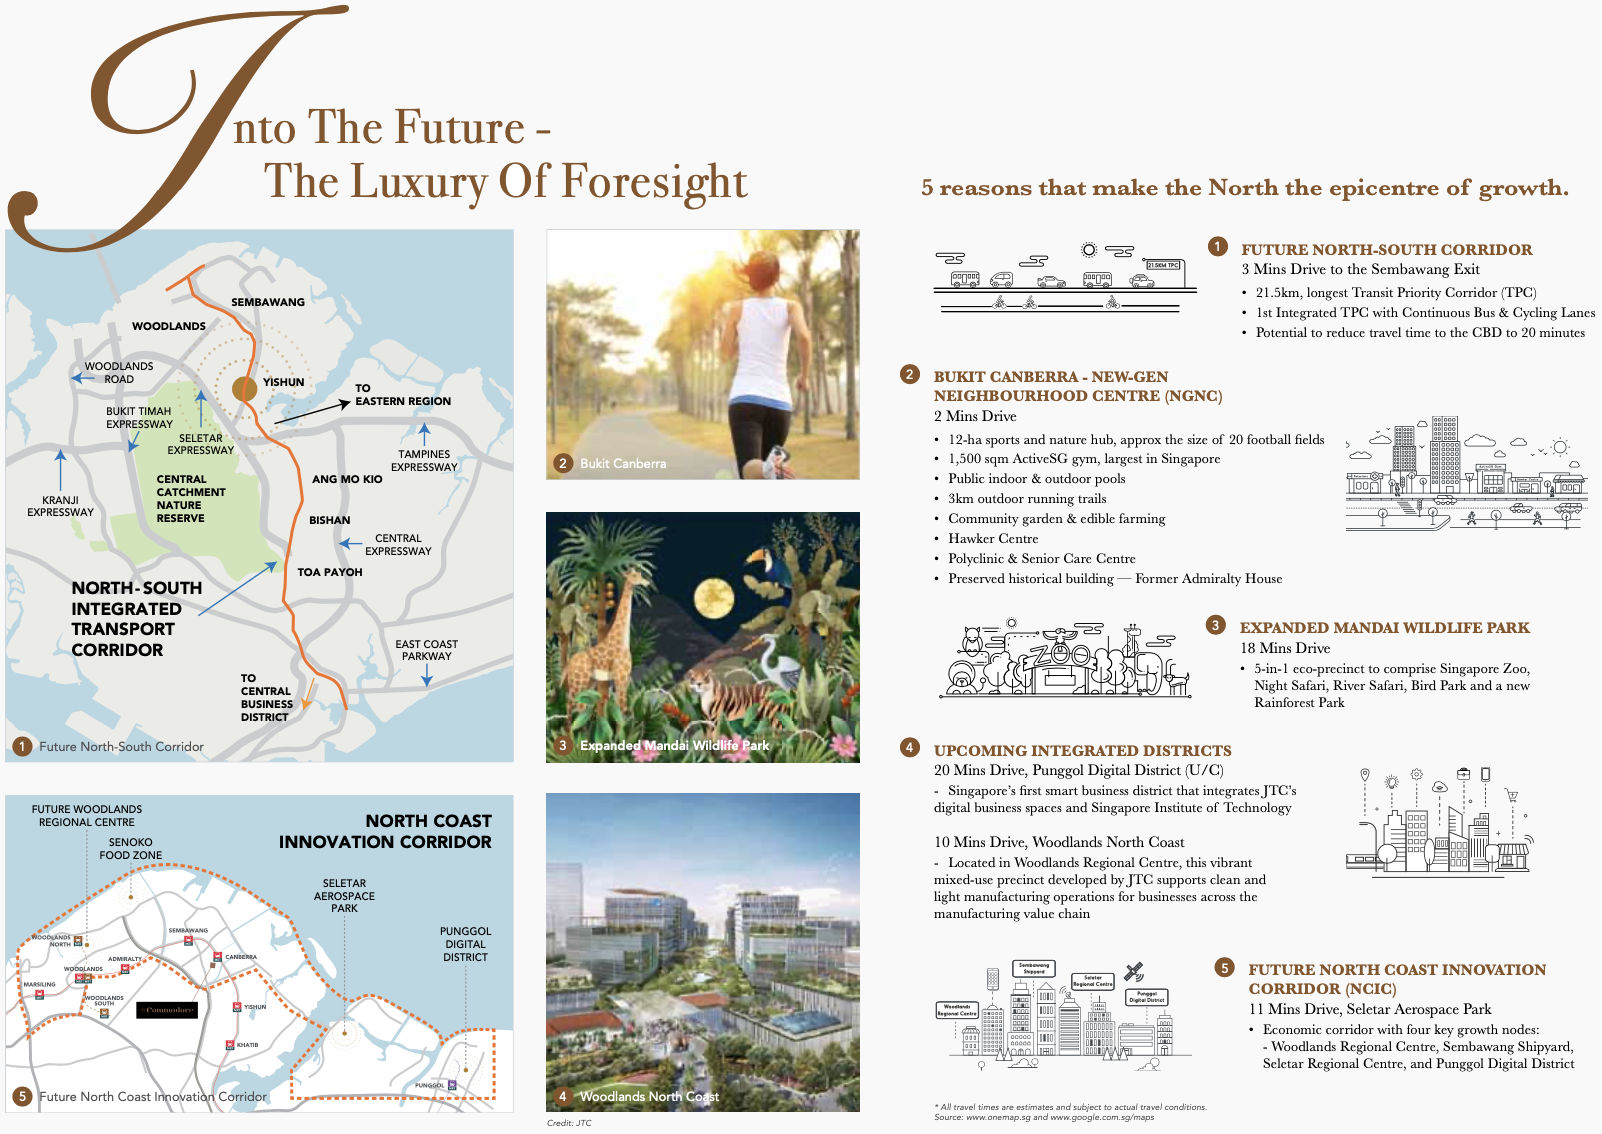 Growth Plans for the North of Singapore